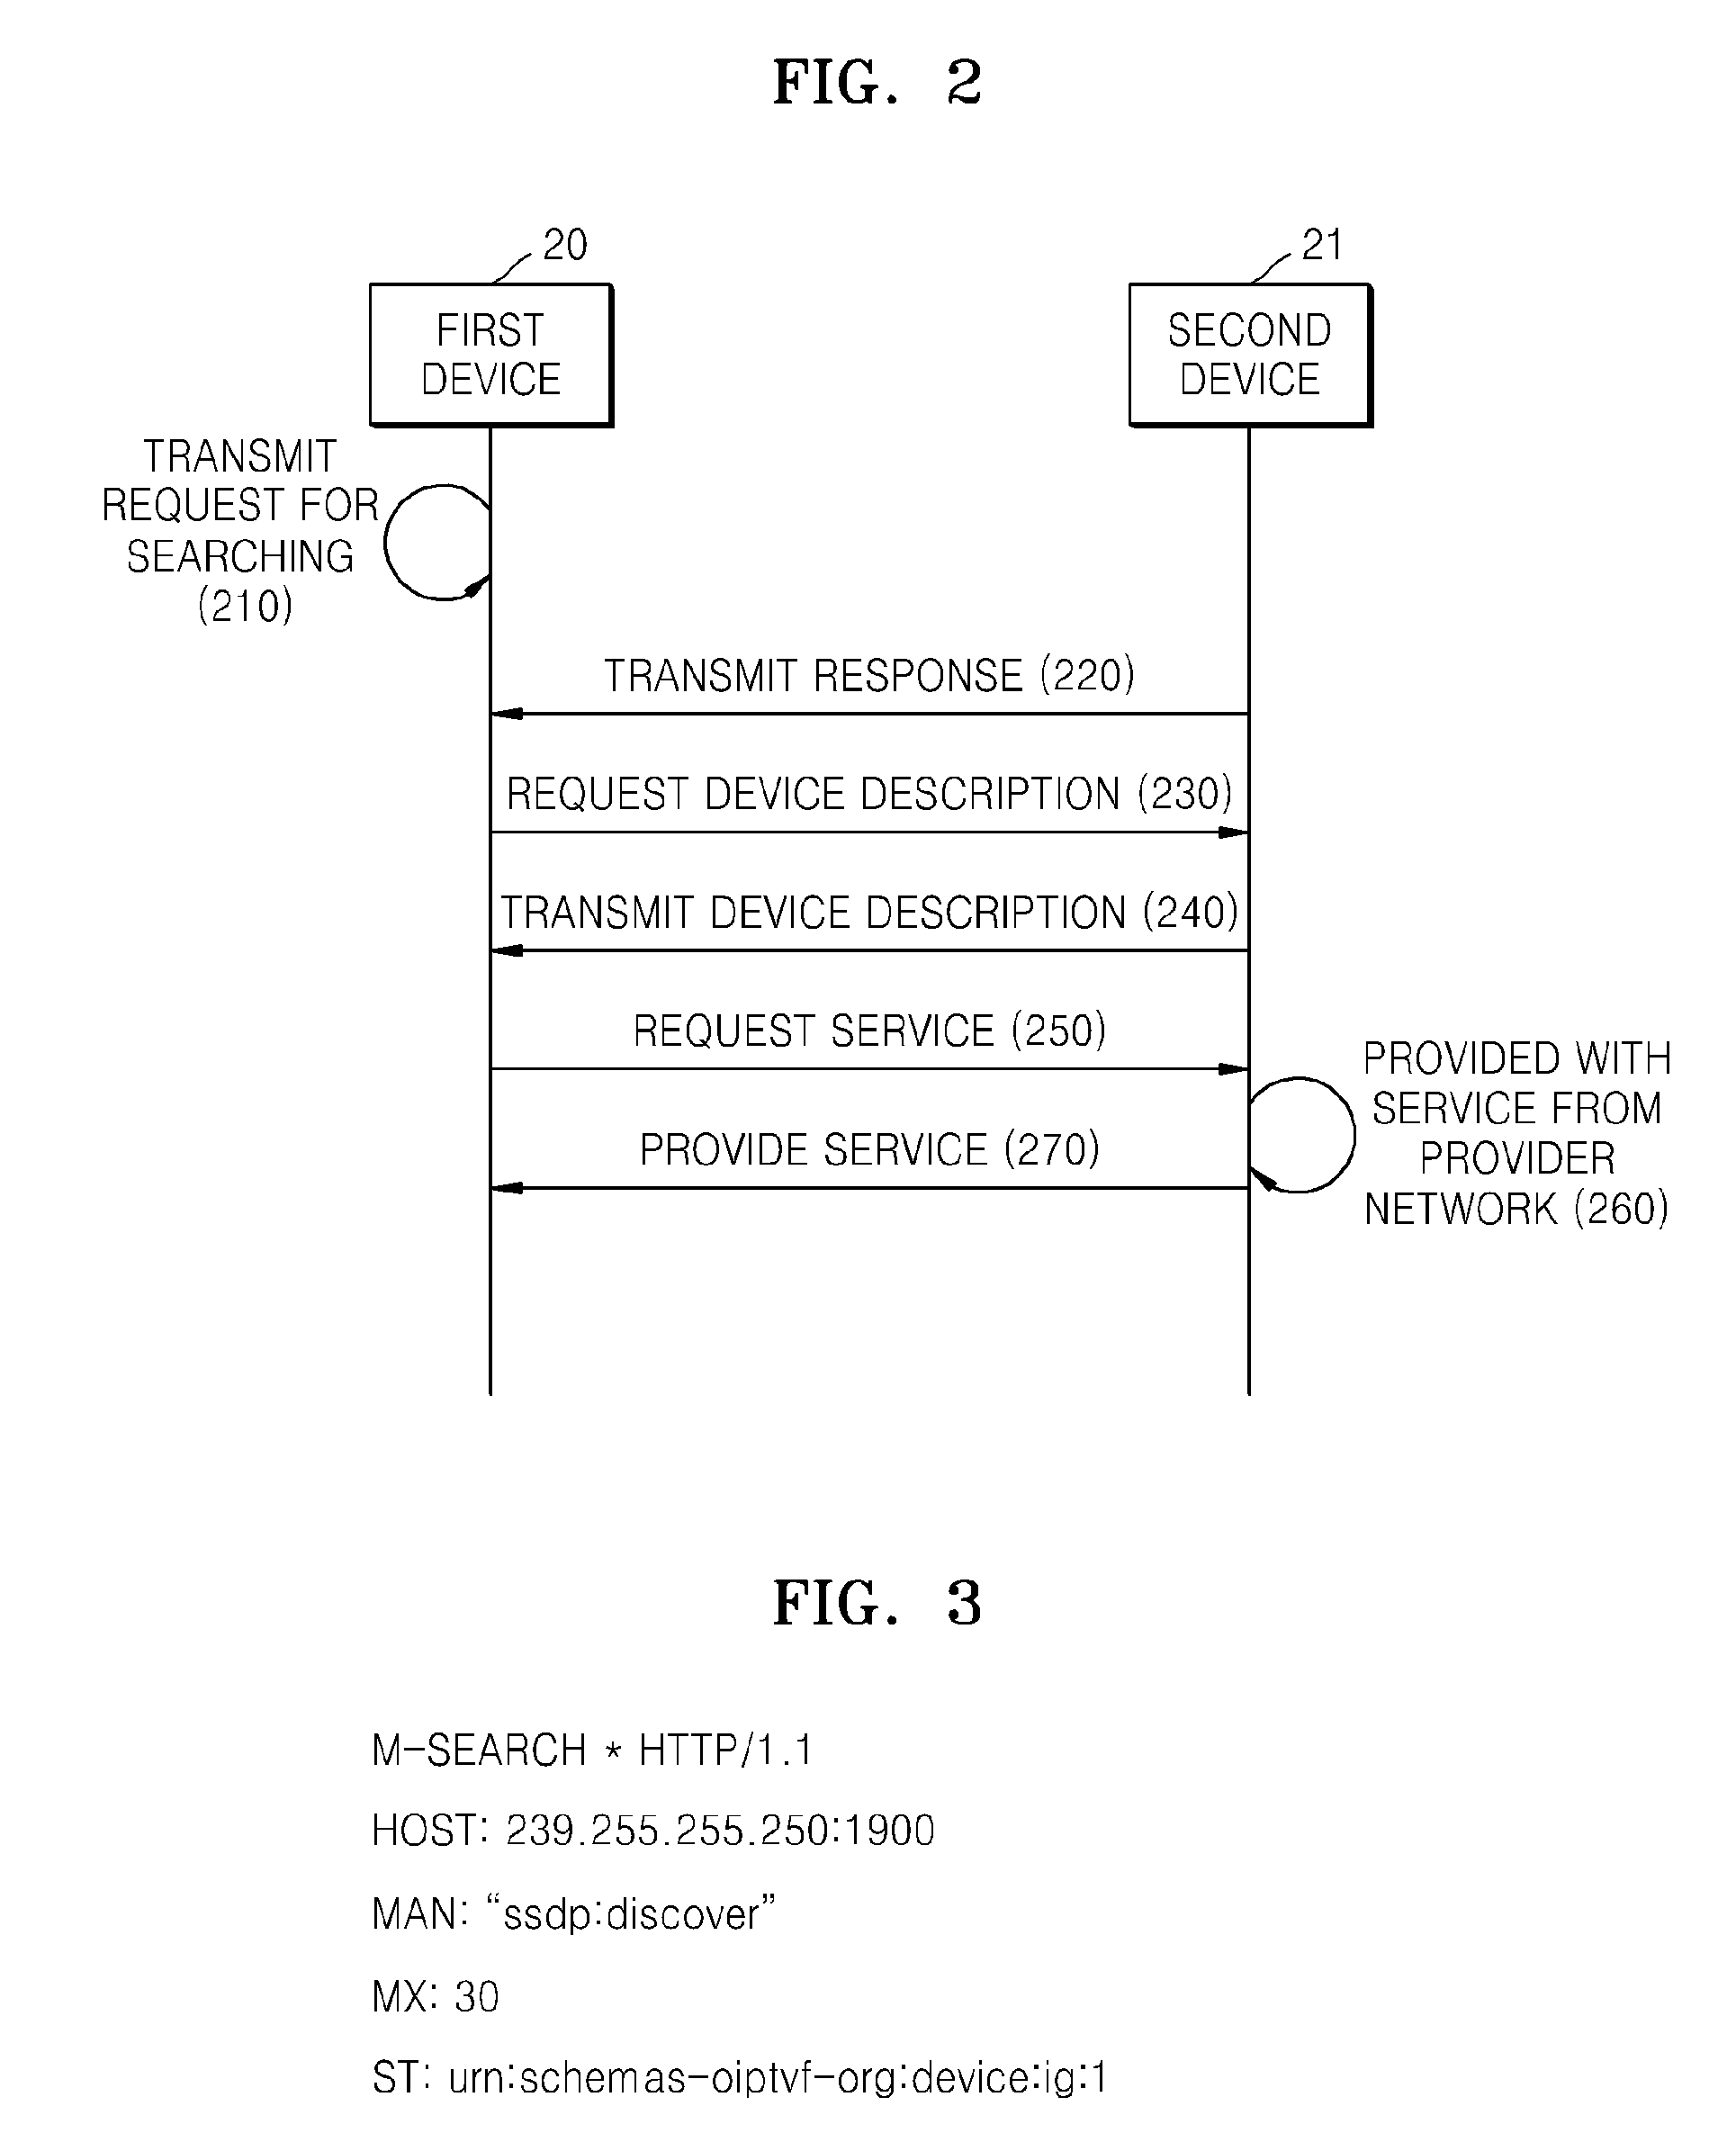 Method and apparatus for searching for IPTV service relay devices and method and apparatus for interacting with devices